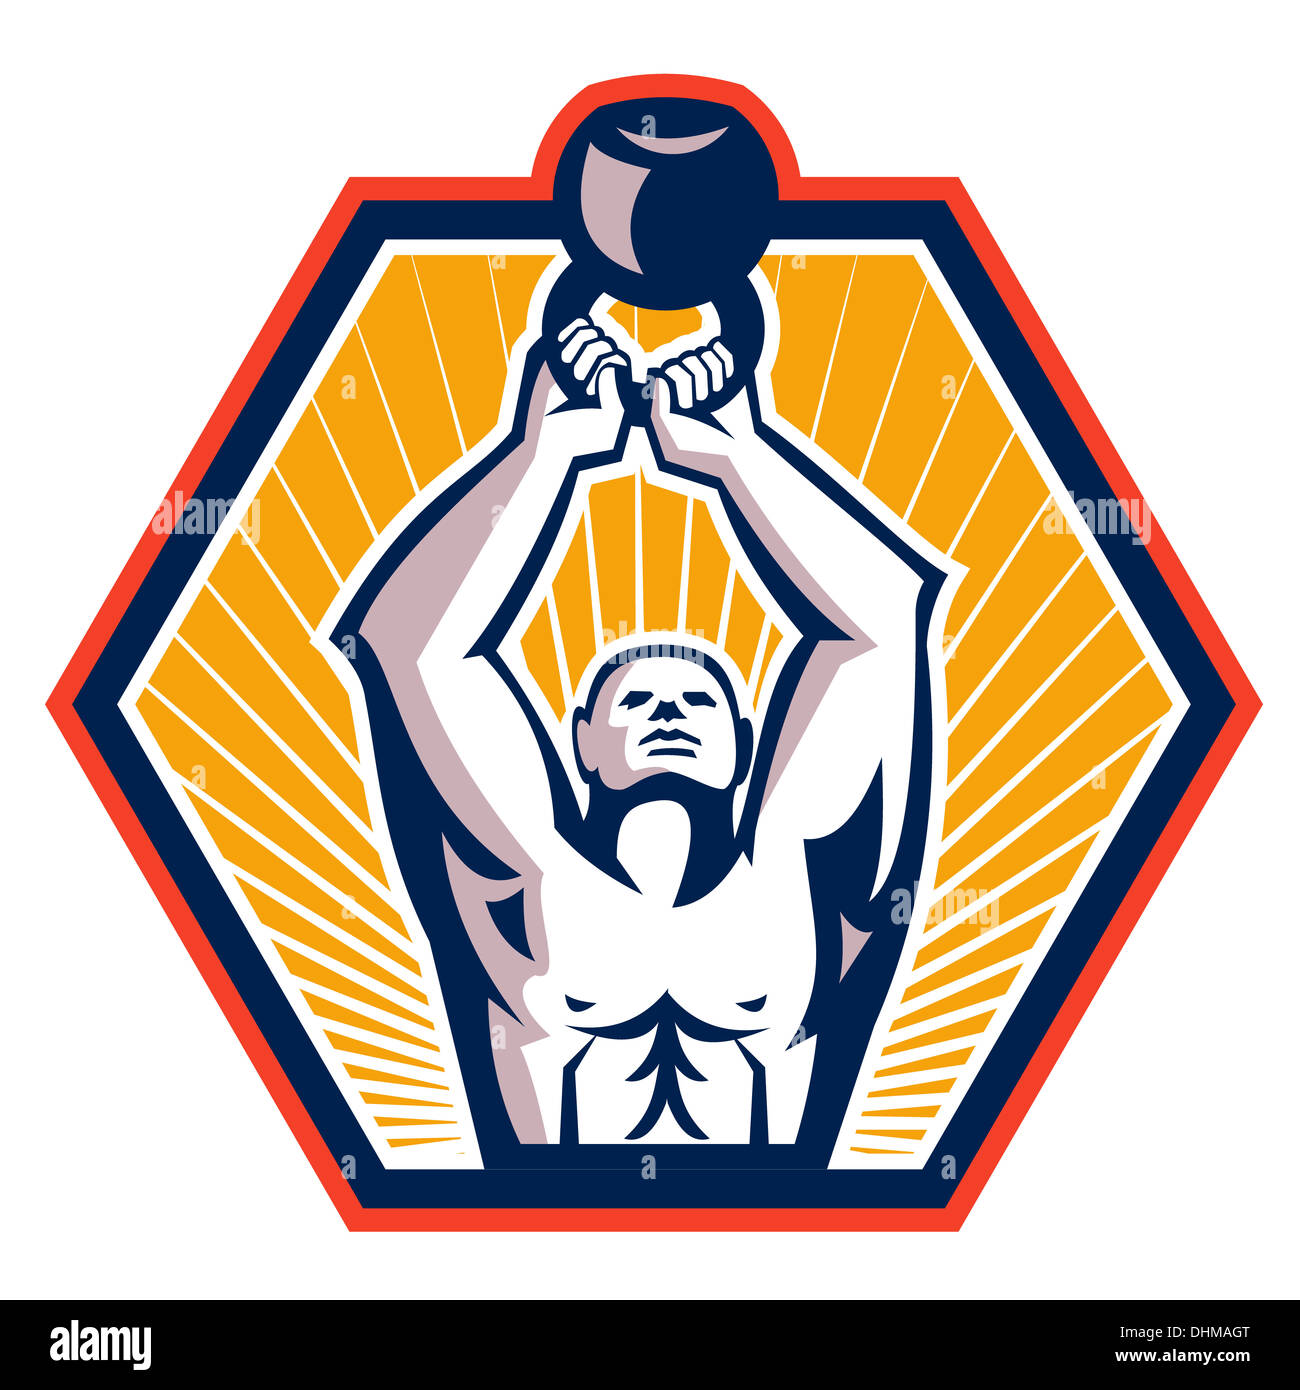 Illustration of a crossfit athlete muscle-up lifting kettlebell facing front set inside hexagon shape done in retro style on isolated white background Stock Photo